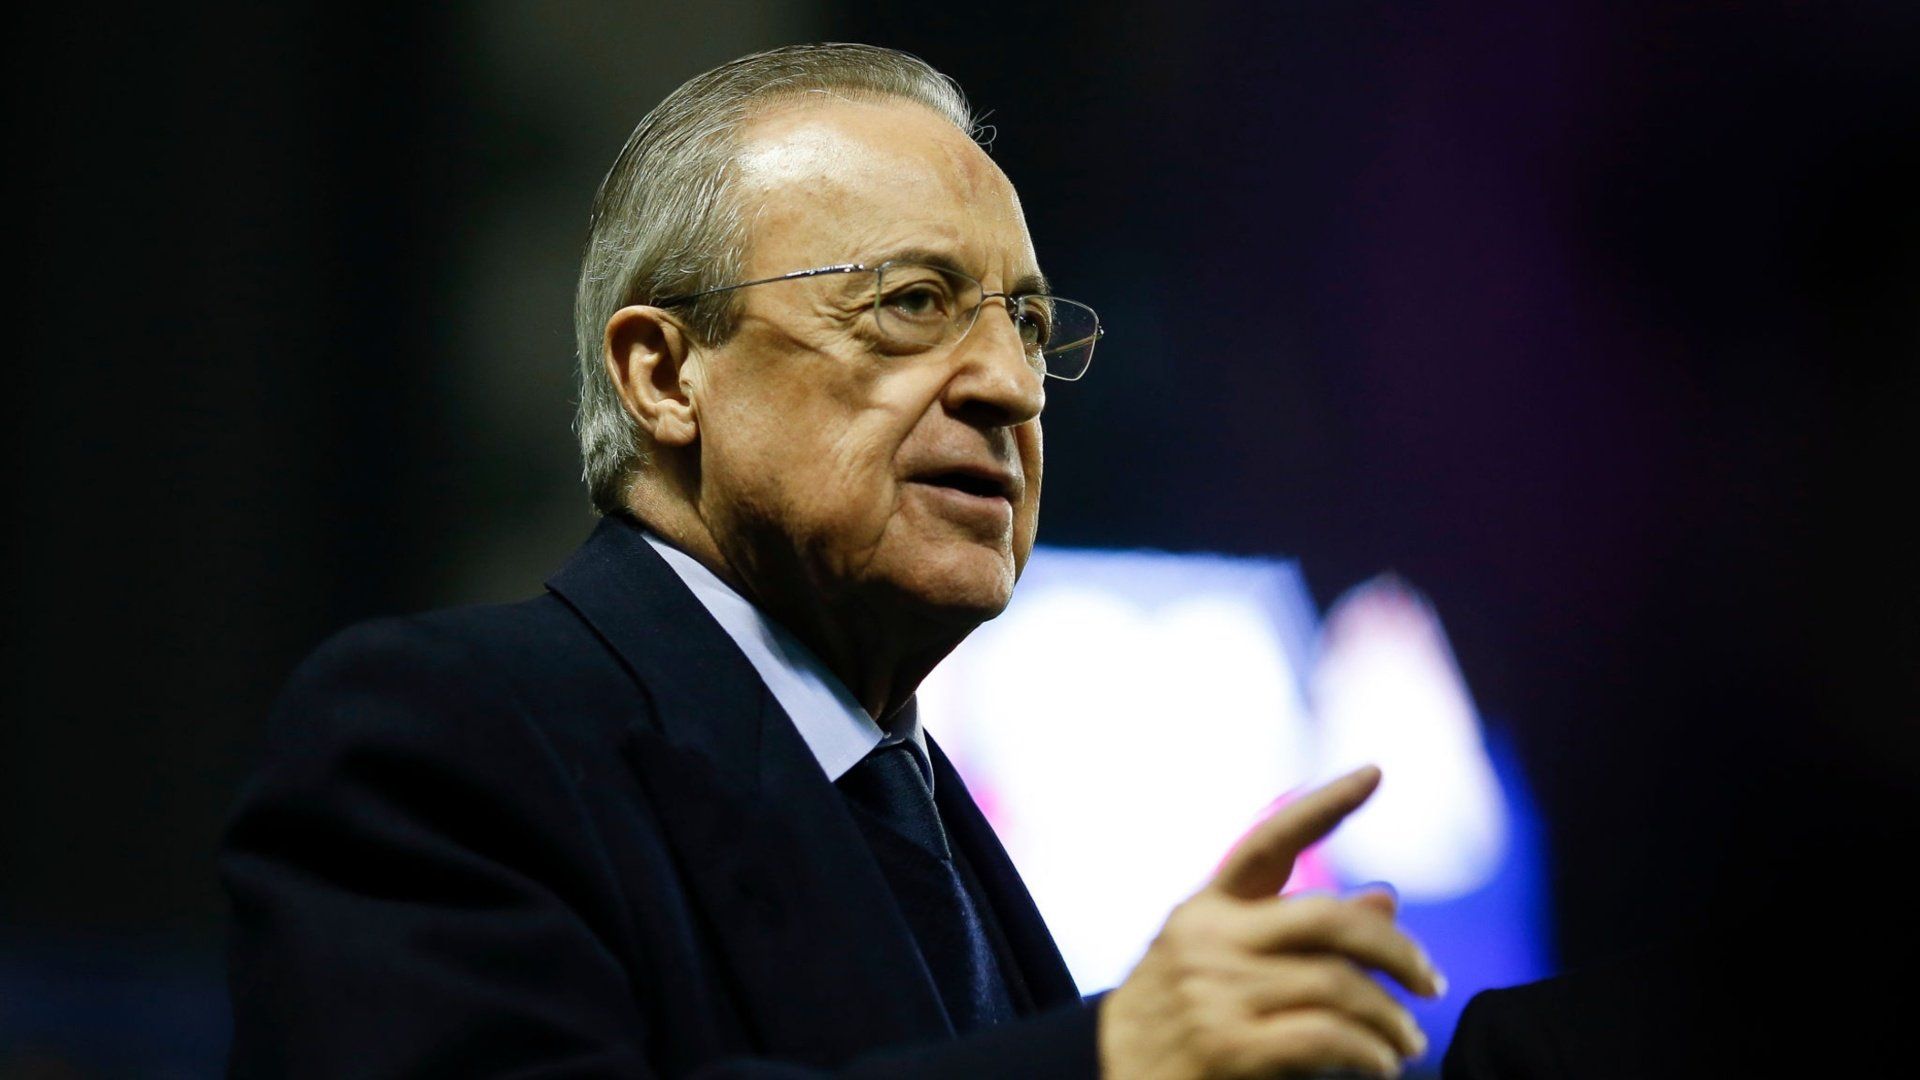 Florentino Perez is irreplaceable, regardless of his many flaws